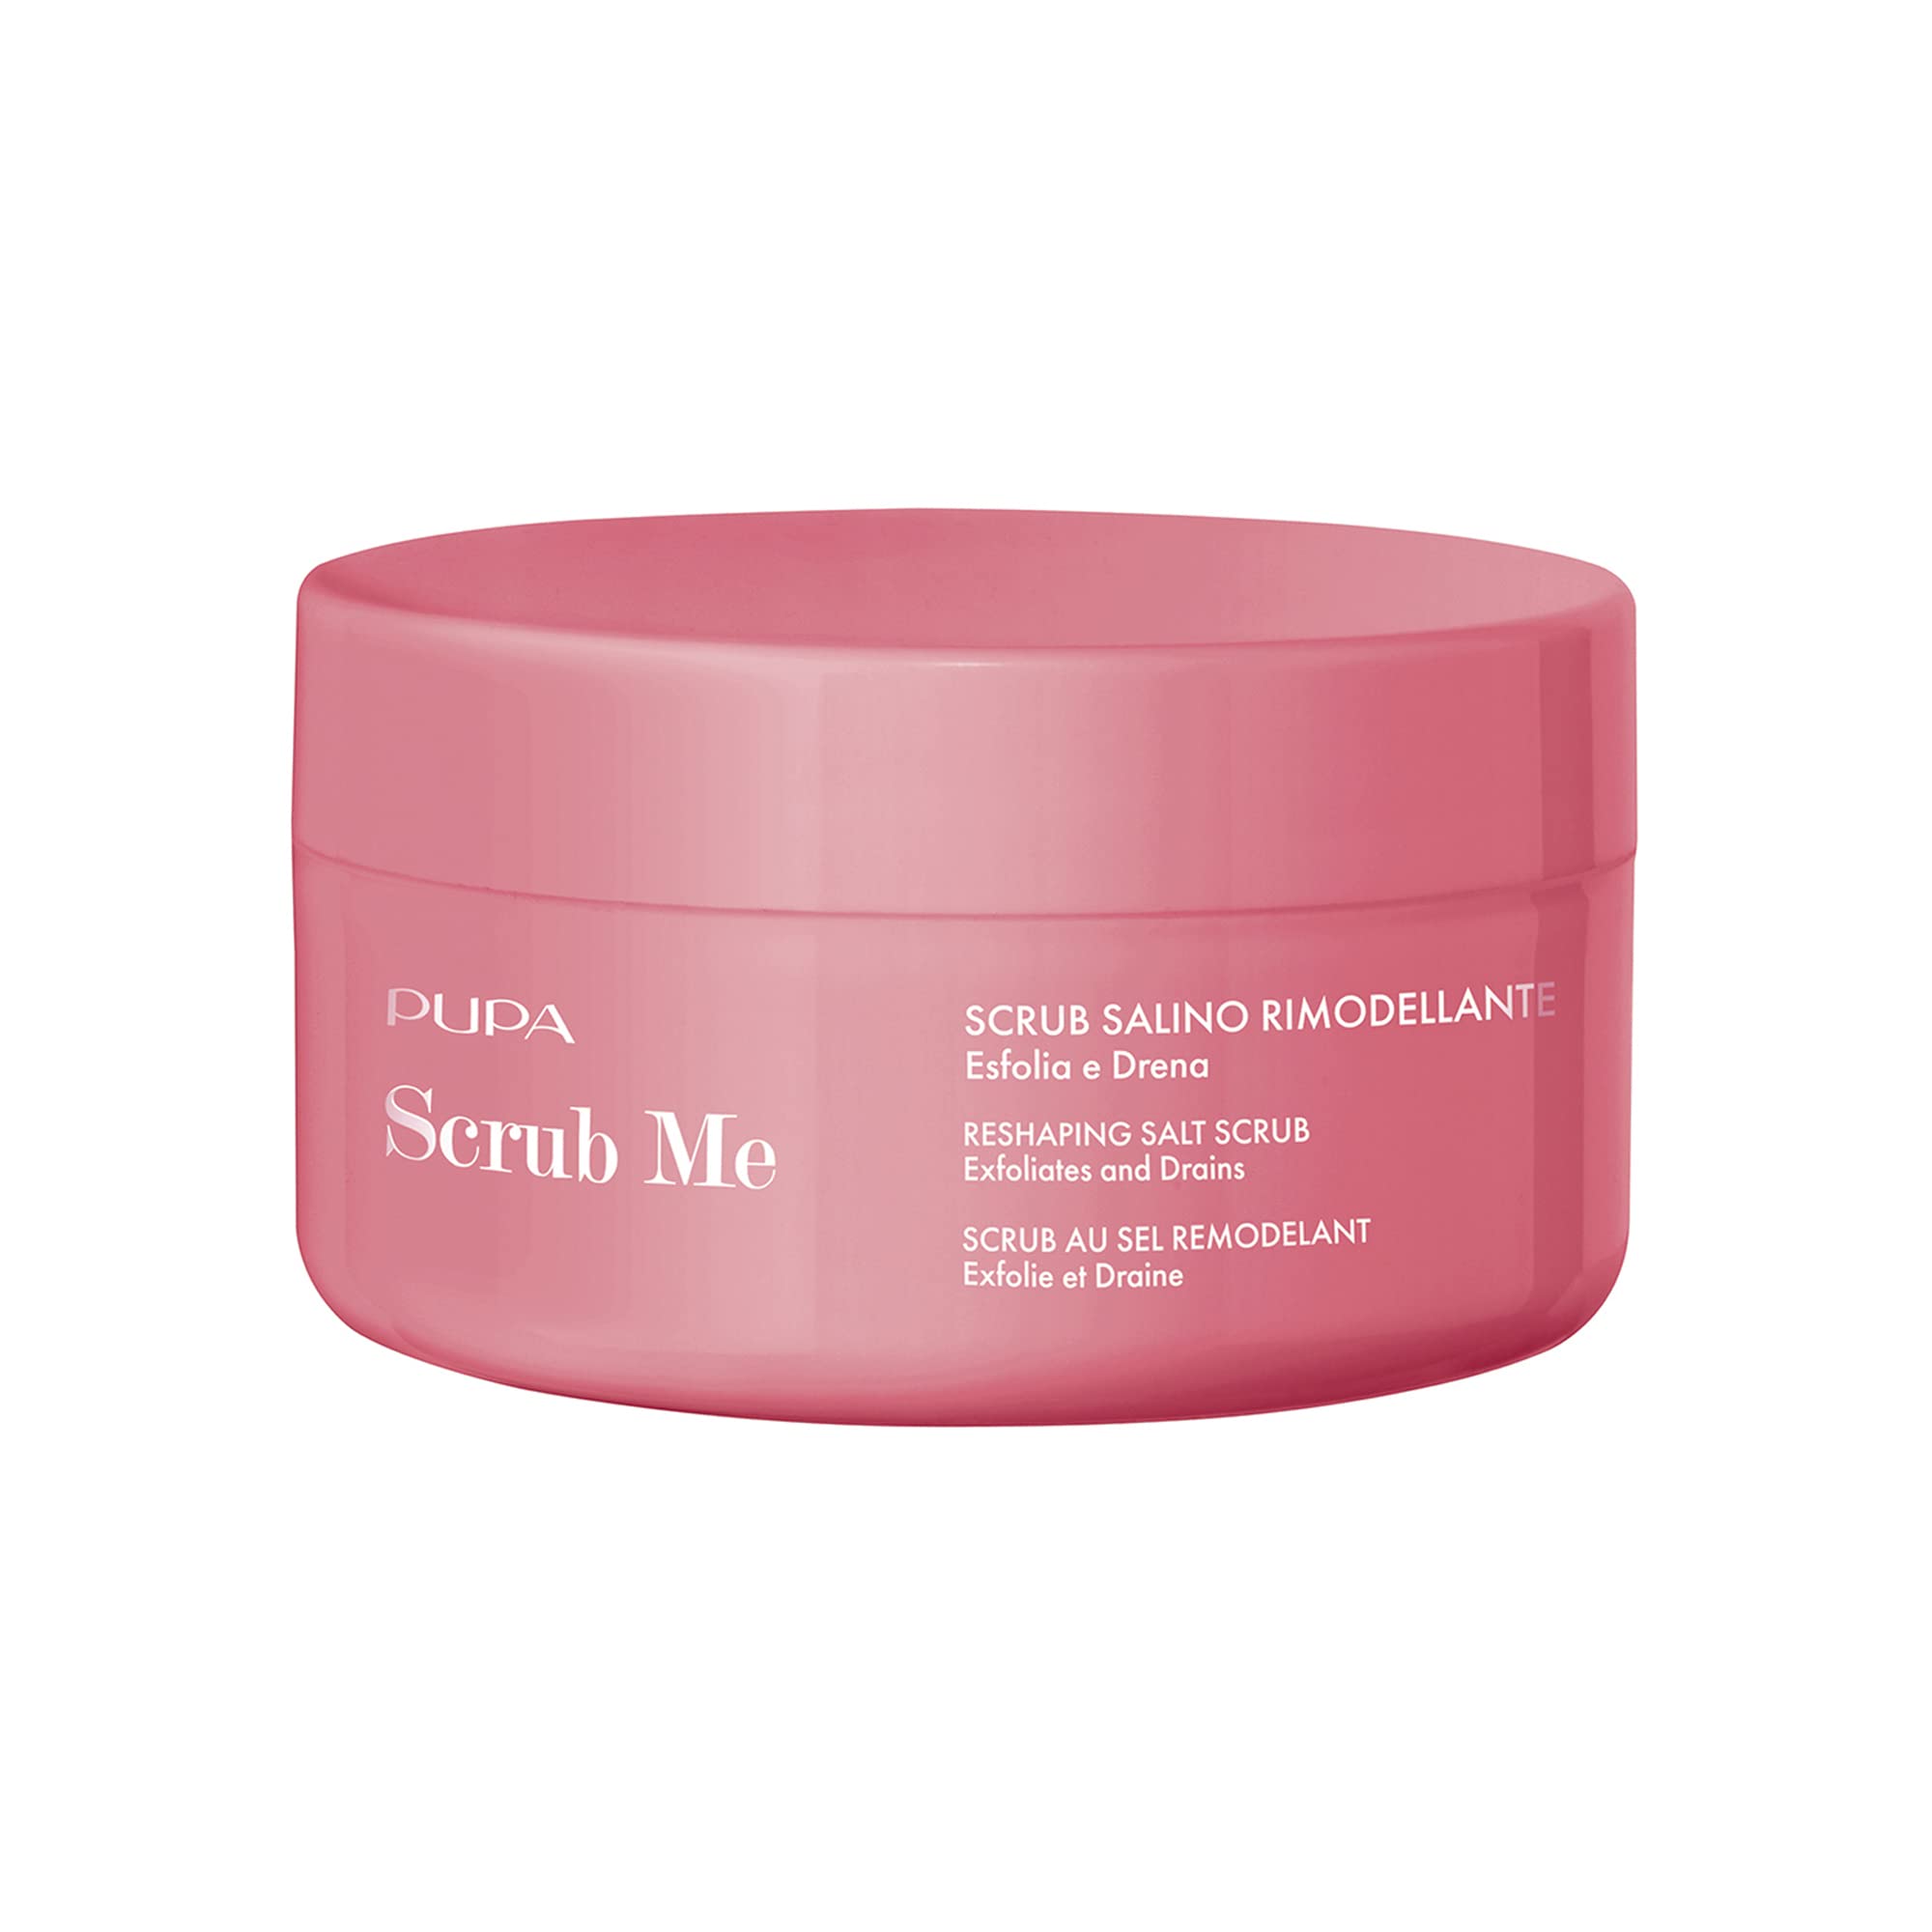 PUPA Milano Scrub Me Reshaping Salt Scrub - Counteracts Fluid Retention - Eliminates Dead Cells - Intensely Nourishes Skin - Contains Salt And Vegetable Oils - Dermatologically Tested - 12.34 Oz